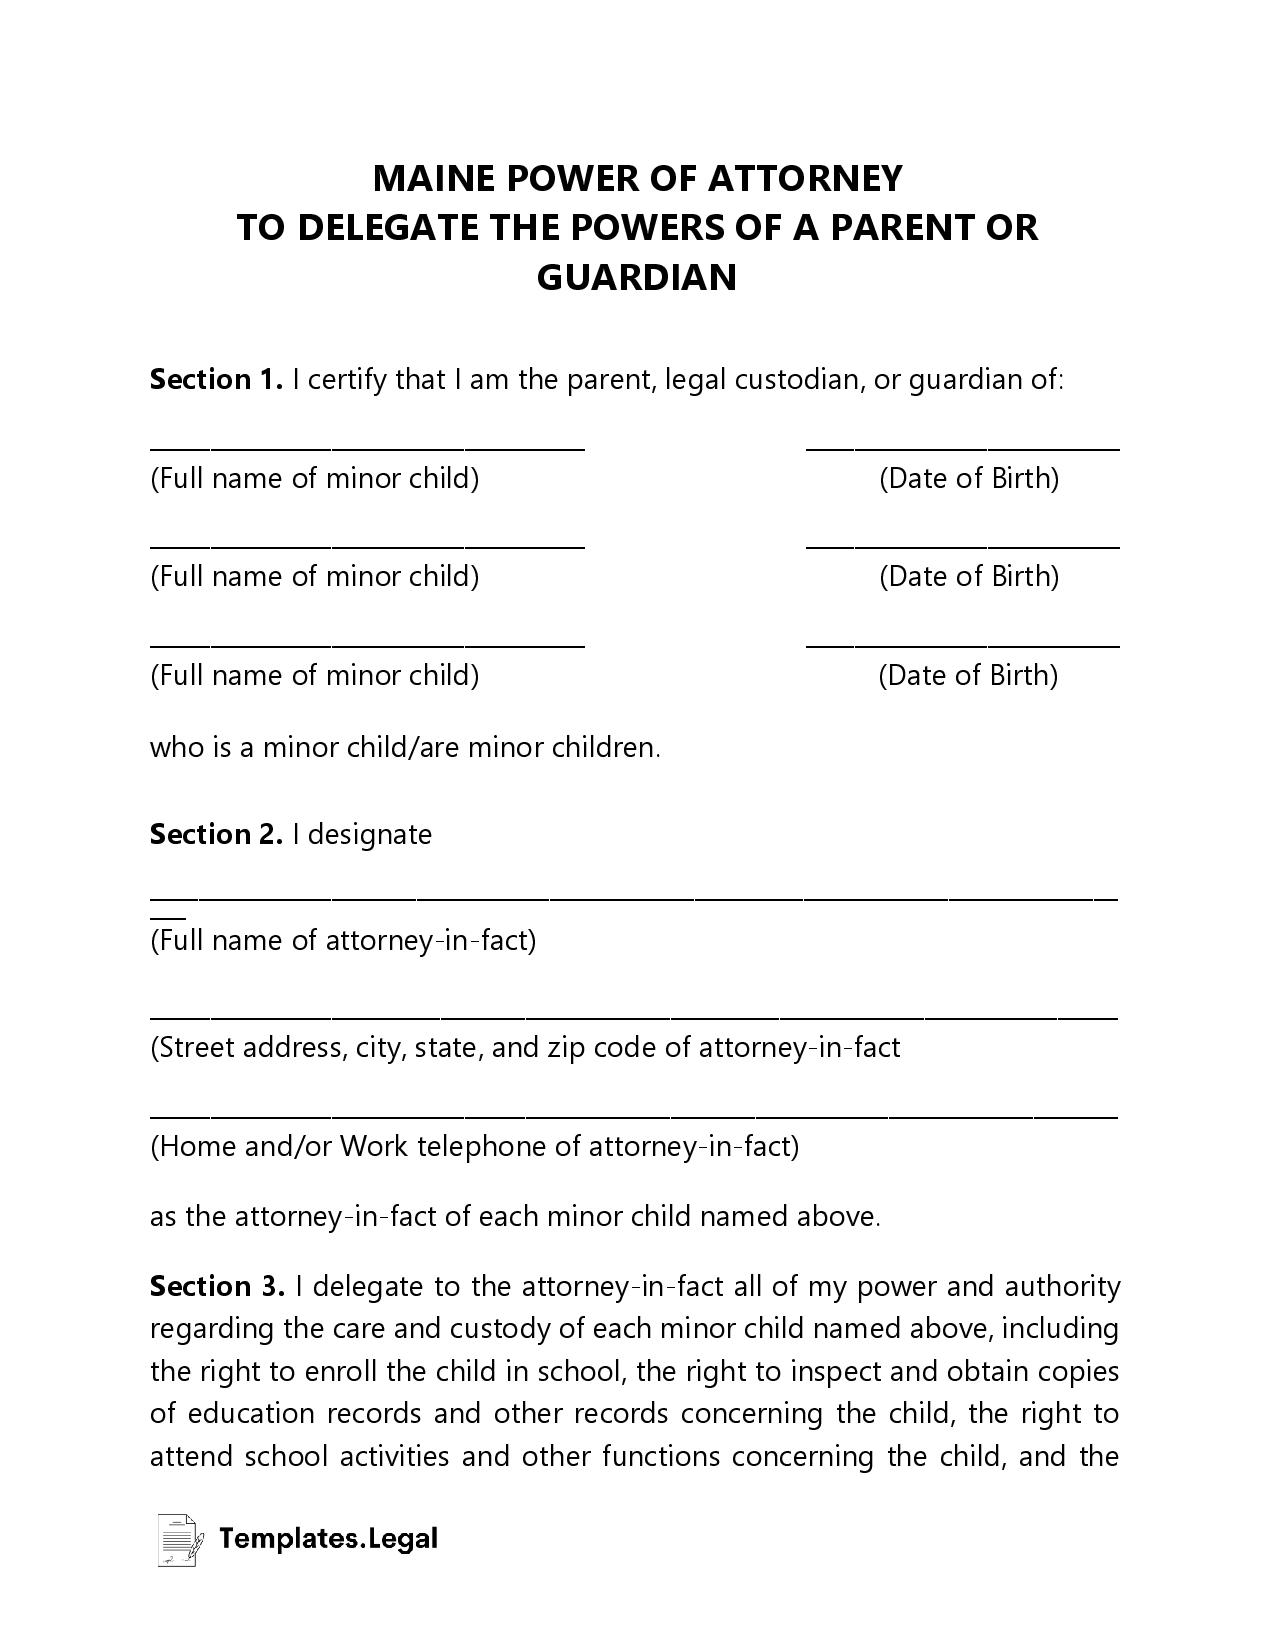 Maine Minor (Child) Power of Attorney - Templates.Legal